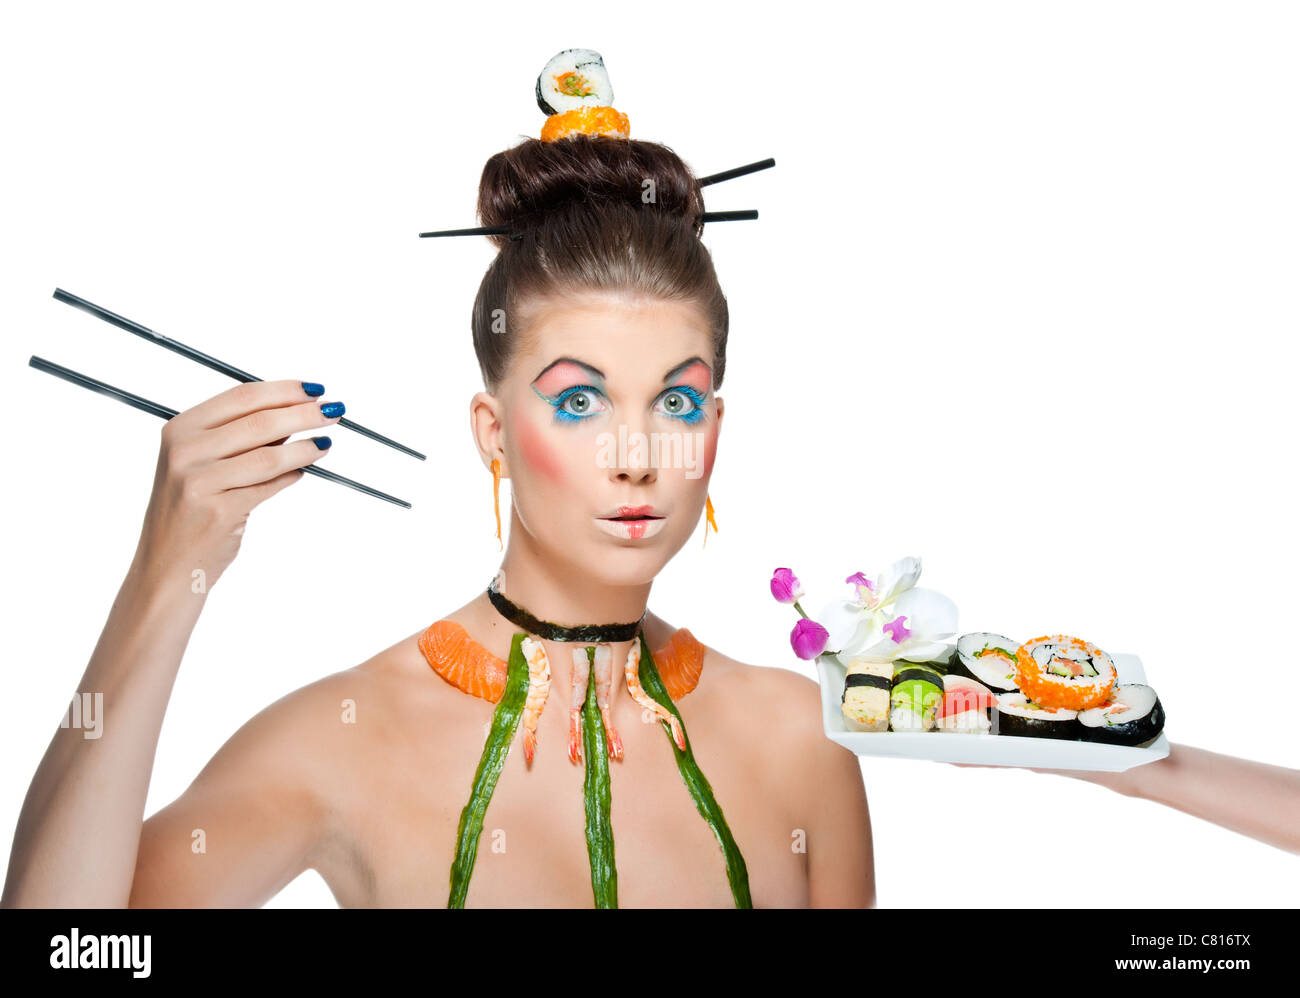 A creative and colorful image of a fashion model wearing asian themed makeup and raw sushi Stock Photo